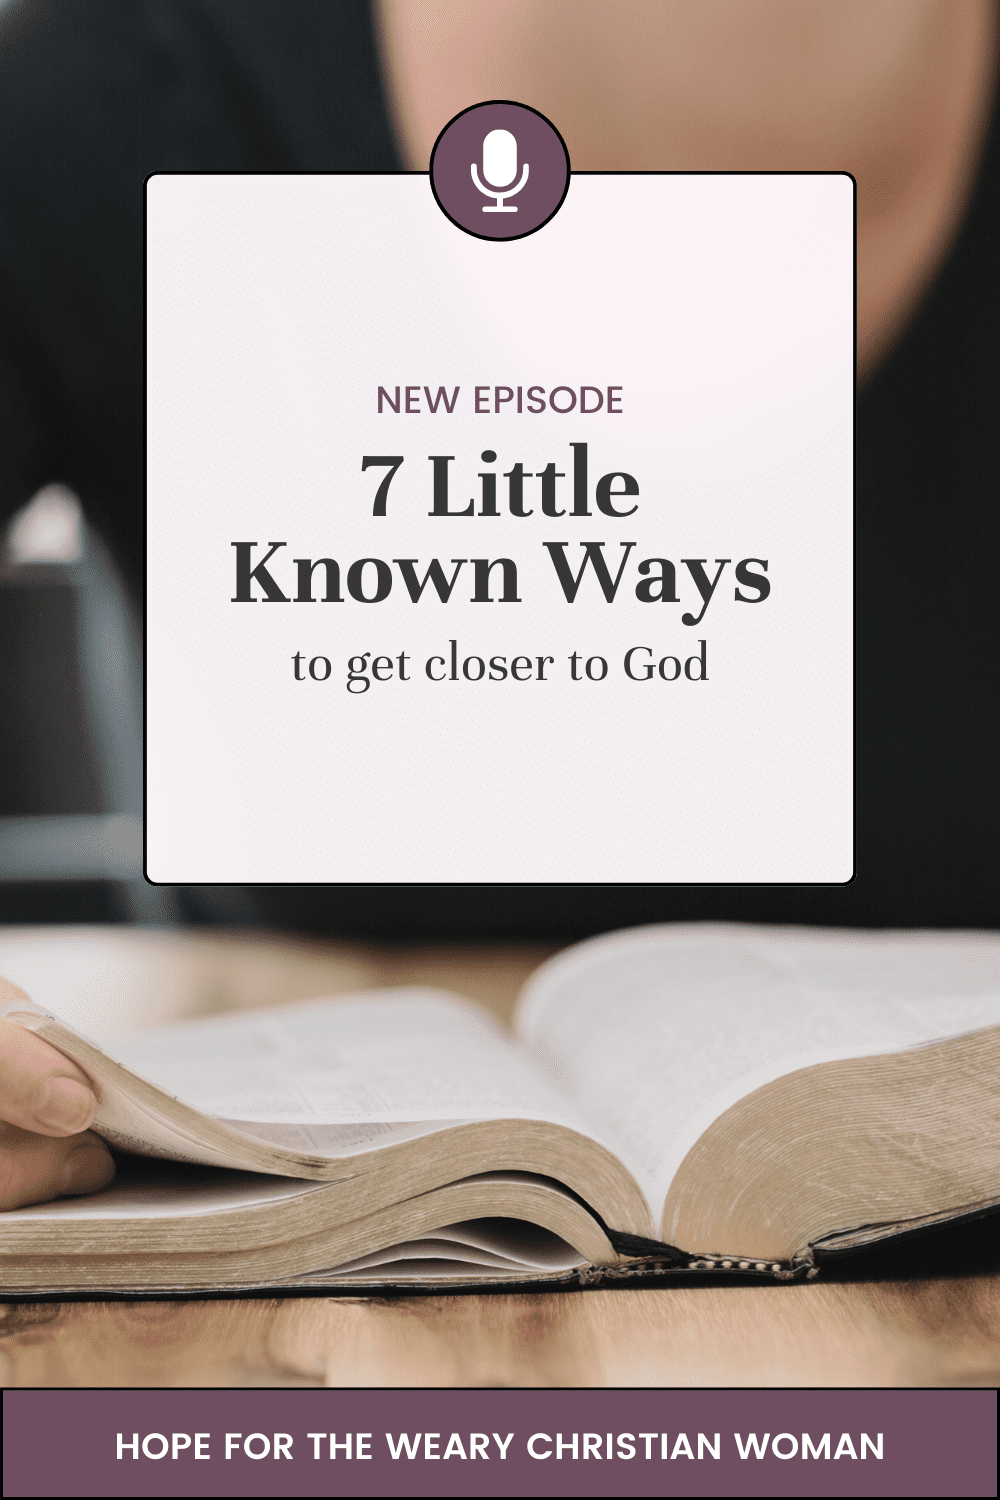 Bible study and prayer aren't the only way to grow closer to God. If you are feeling bored or unmotivated sometimes switching things up during your quiet time with God can make a big difference. If you're looking for new ways to get to know God better I cover this in depth in this podcast episode. Talking to God is a great way to grow your faith and I'm sharing some creative ways to do that. I also cover different ways to engaged with scripture. Visit the full blog post to read more.